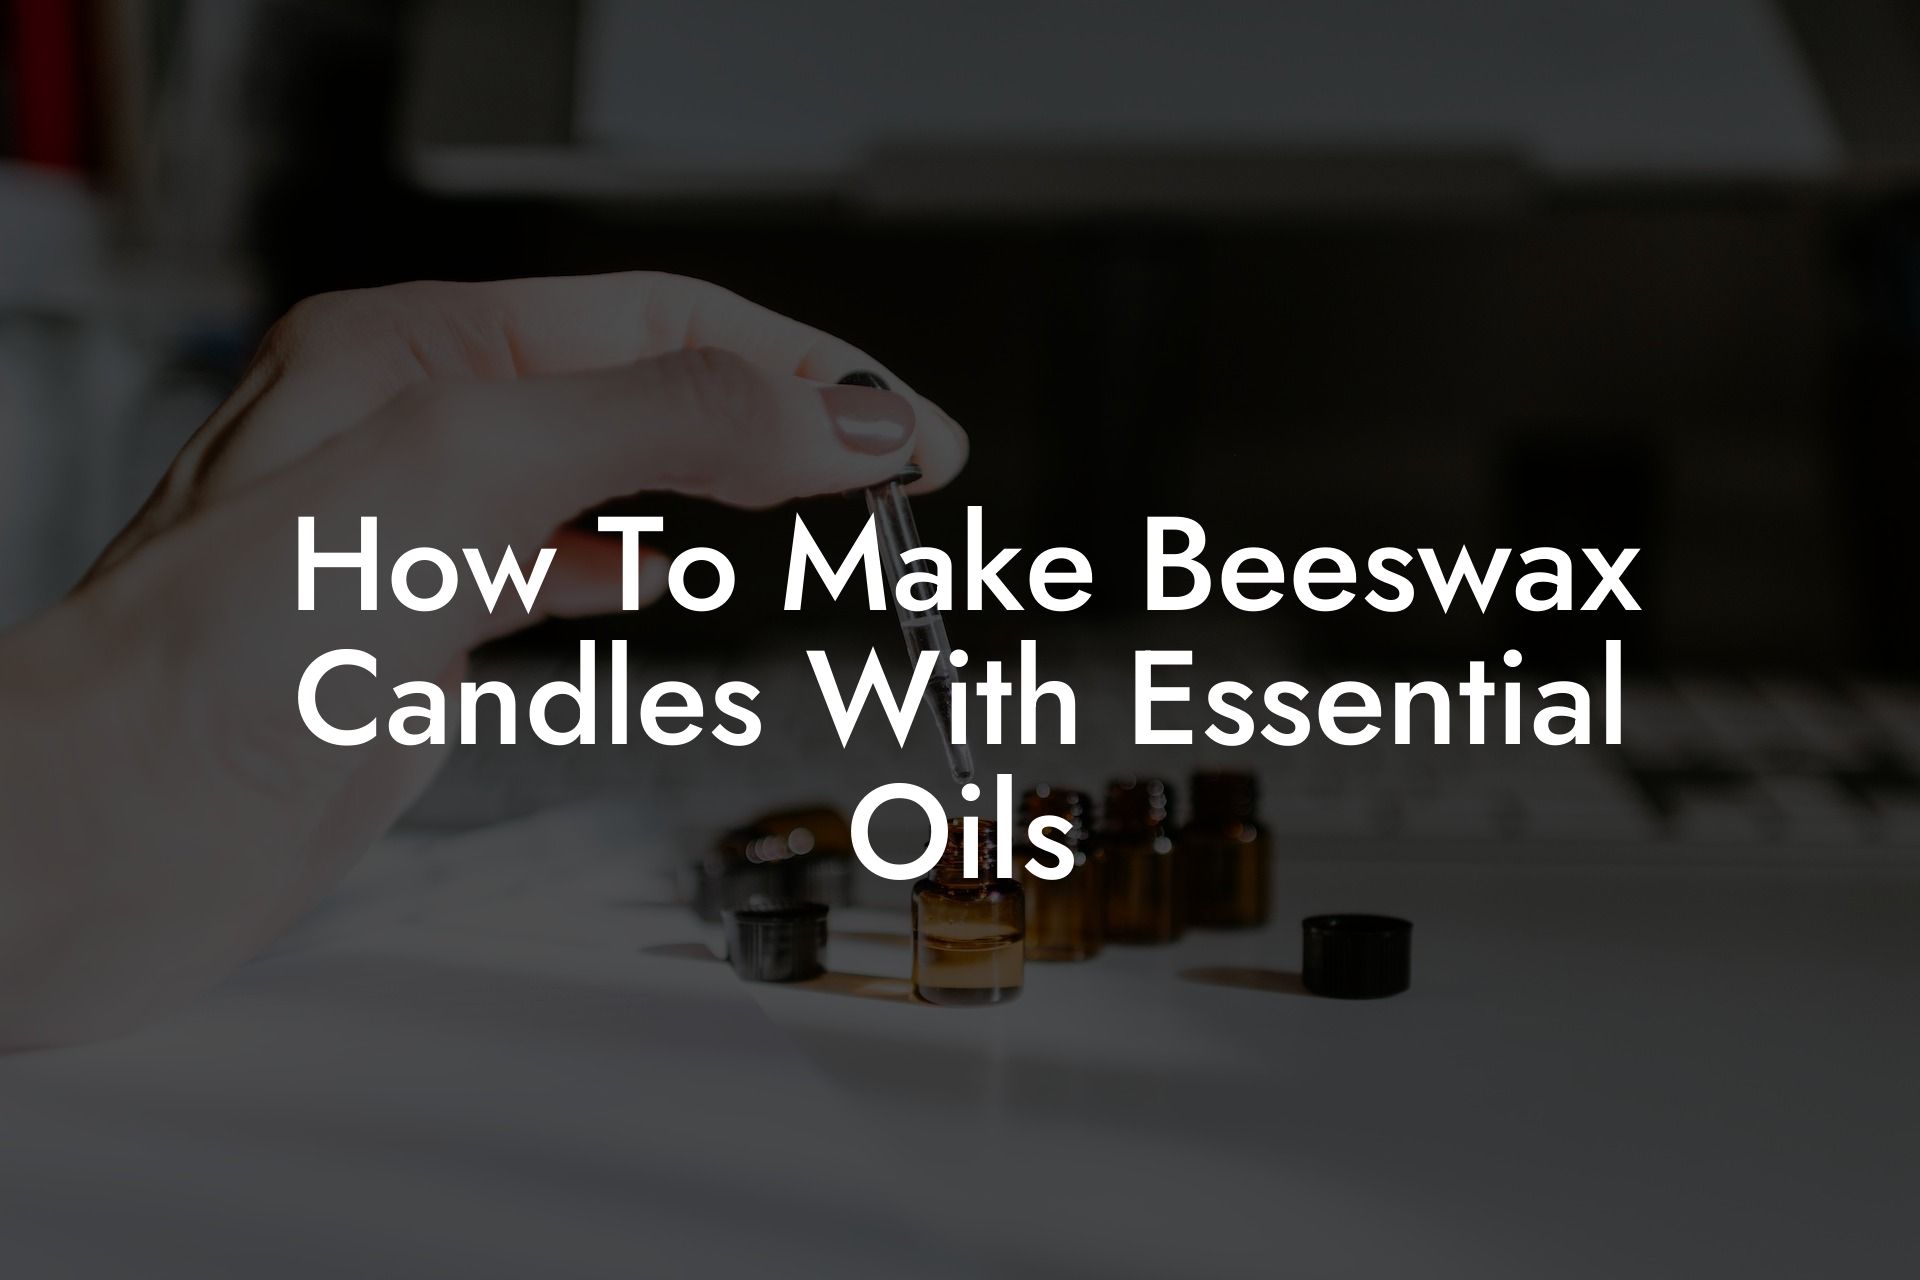 How To Make Beeswax Candles With Essential Oils